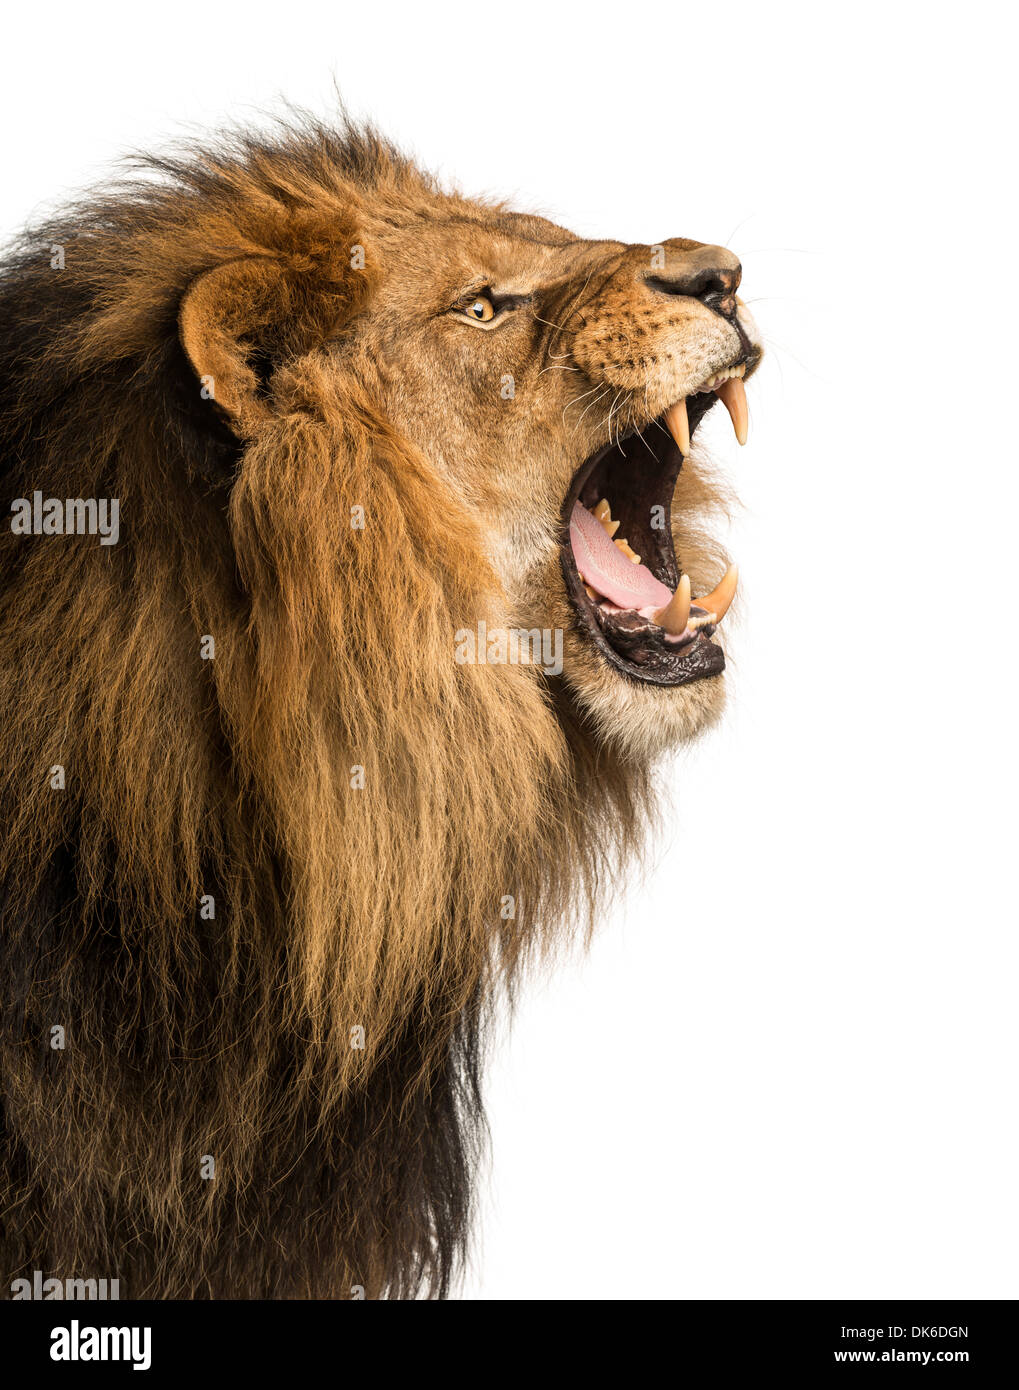 Close-up of a Lion roaring against white background Banque D'Images